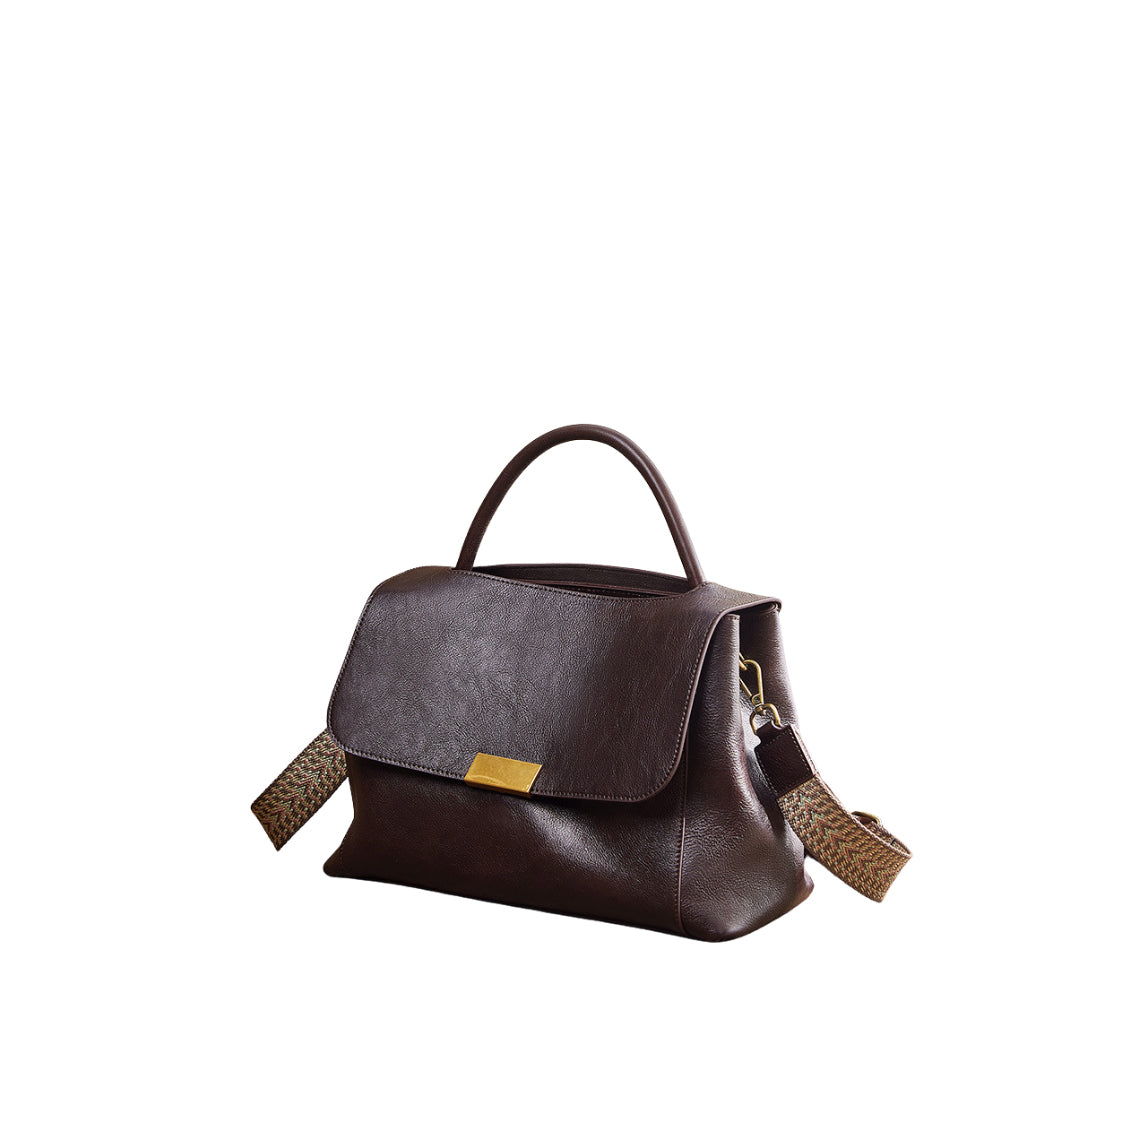 Vegetable Tanned Leather Distressed Top Handle Bag